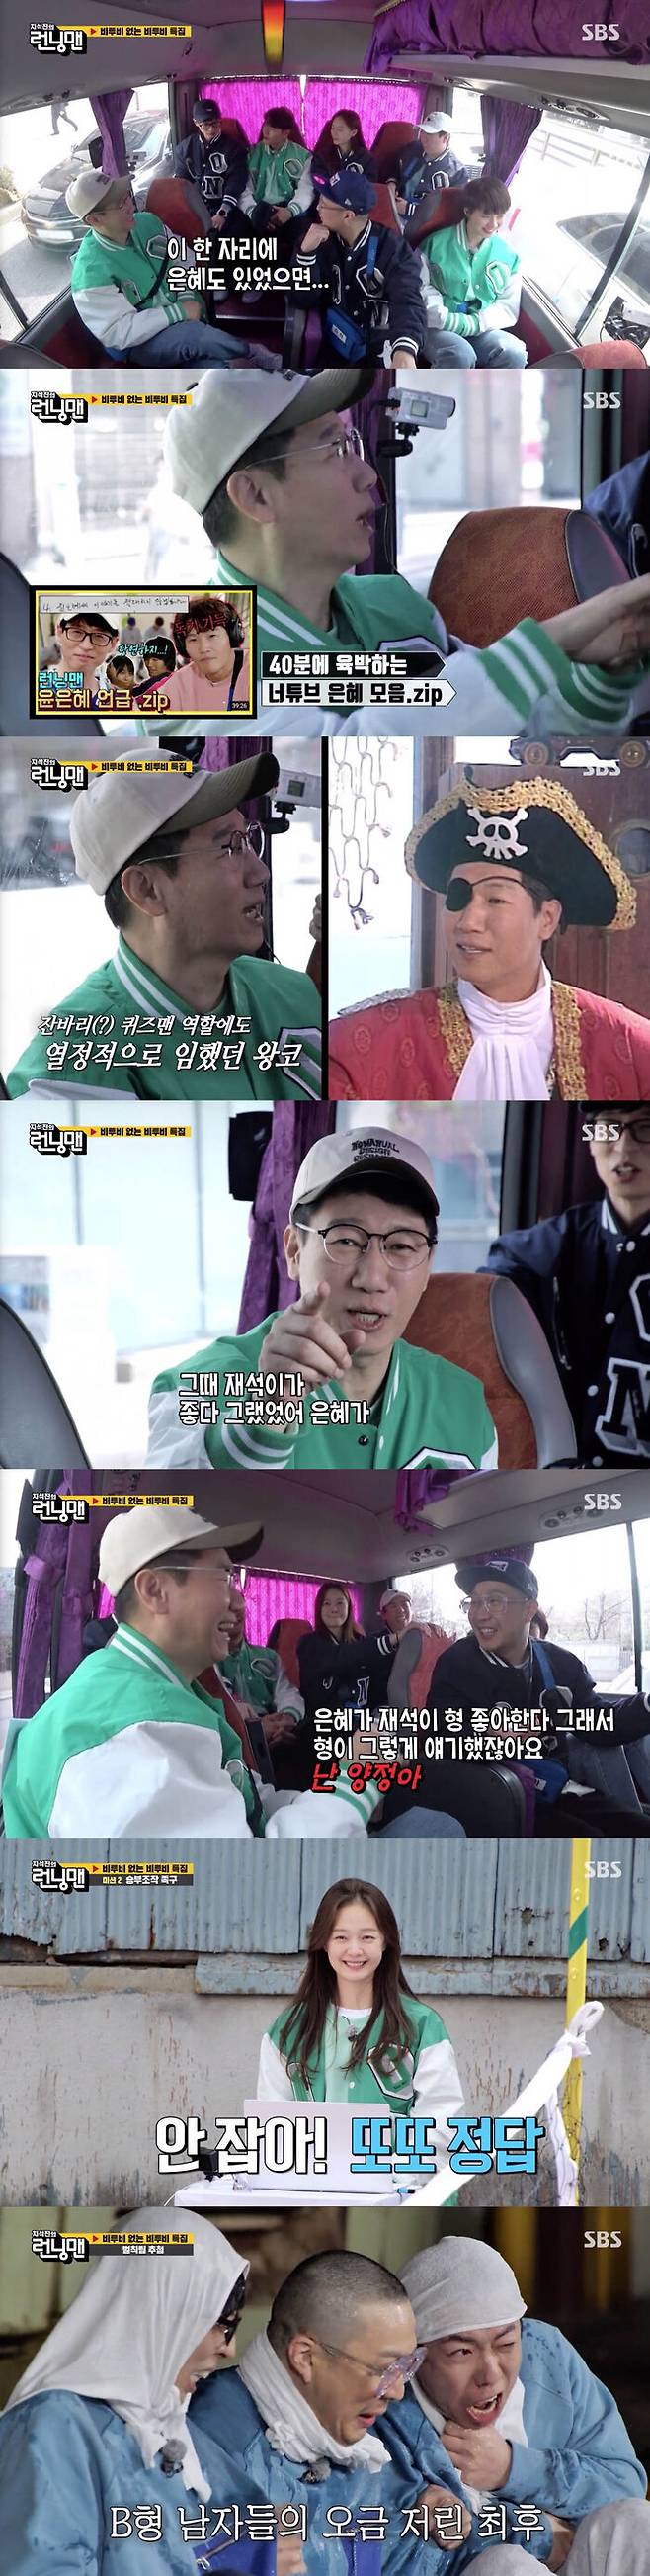 Ji Suk-jin Disclosure who said the former Yoon Eun-hye is good.On SBS Running Man broadcasted on the 27th, BtoB special race without BtoB was held.On the day of the broadcast, a collaboration with BtoB was scheduled, but the plan was urgently revised with the sudden corona 19 confirmation of BtoB members.So, BtoB-free BtoB special feature was decorated with members with B type blood type and members of blood type who did not have blood type were divided into two teams.Members who were conducting one prepared Mission moved to the next Mission place and chatted.At this time, Yoo Jae-Suk mentioned Yoon Eun-hye without any hesitation, I wish there was grace in this one place.Ji Suk-jin said, Running Man grace special has been about an hour, he said, referring to the video posted on YouTube.He said, Lets contact you, please. He pretended to be close to Yoon Eun-hye.Yoo Jae-Suk then questioned Ji Suk-jin about his friendship with Yoon Eun-hye.Ji Suk-jin said, I used to share SBS Boyar expedition.And he said, At that time, grace said that it was good, and Haha said, So did not you say Yang Jung-aa was good?On this day, the members made a game-manipulated footwear mission, which was a mission where Jeon So-min, who was a referee, could score his team without knowing his opponent.The opponent team was a game in which Jeon So-min manipulated the game and the game was invalid.The opponent team, the B-type team, quickly grasped the expression of Jeon So-min, so the B-type team repeatedly restrained the game manipulation of Jeon So-min.The song Ji-hyo, who was disapproved by Jeon So-min, who read the expression really, laughed and laughed, Hey, youre just turning around.The last Mission went without chalk.However, this Mission was saddened by the end of Mission in just 11 minutes, the shortest time in Running Man history.After all Missions, the crew decided a team to be penalized by a lottery; as a result, despite the odds of Kwon Yuri, the B-type team was defeated and caught the eye by a bucket of water.